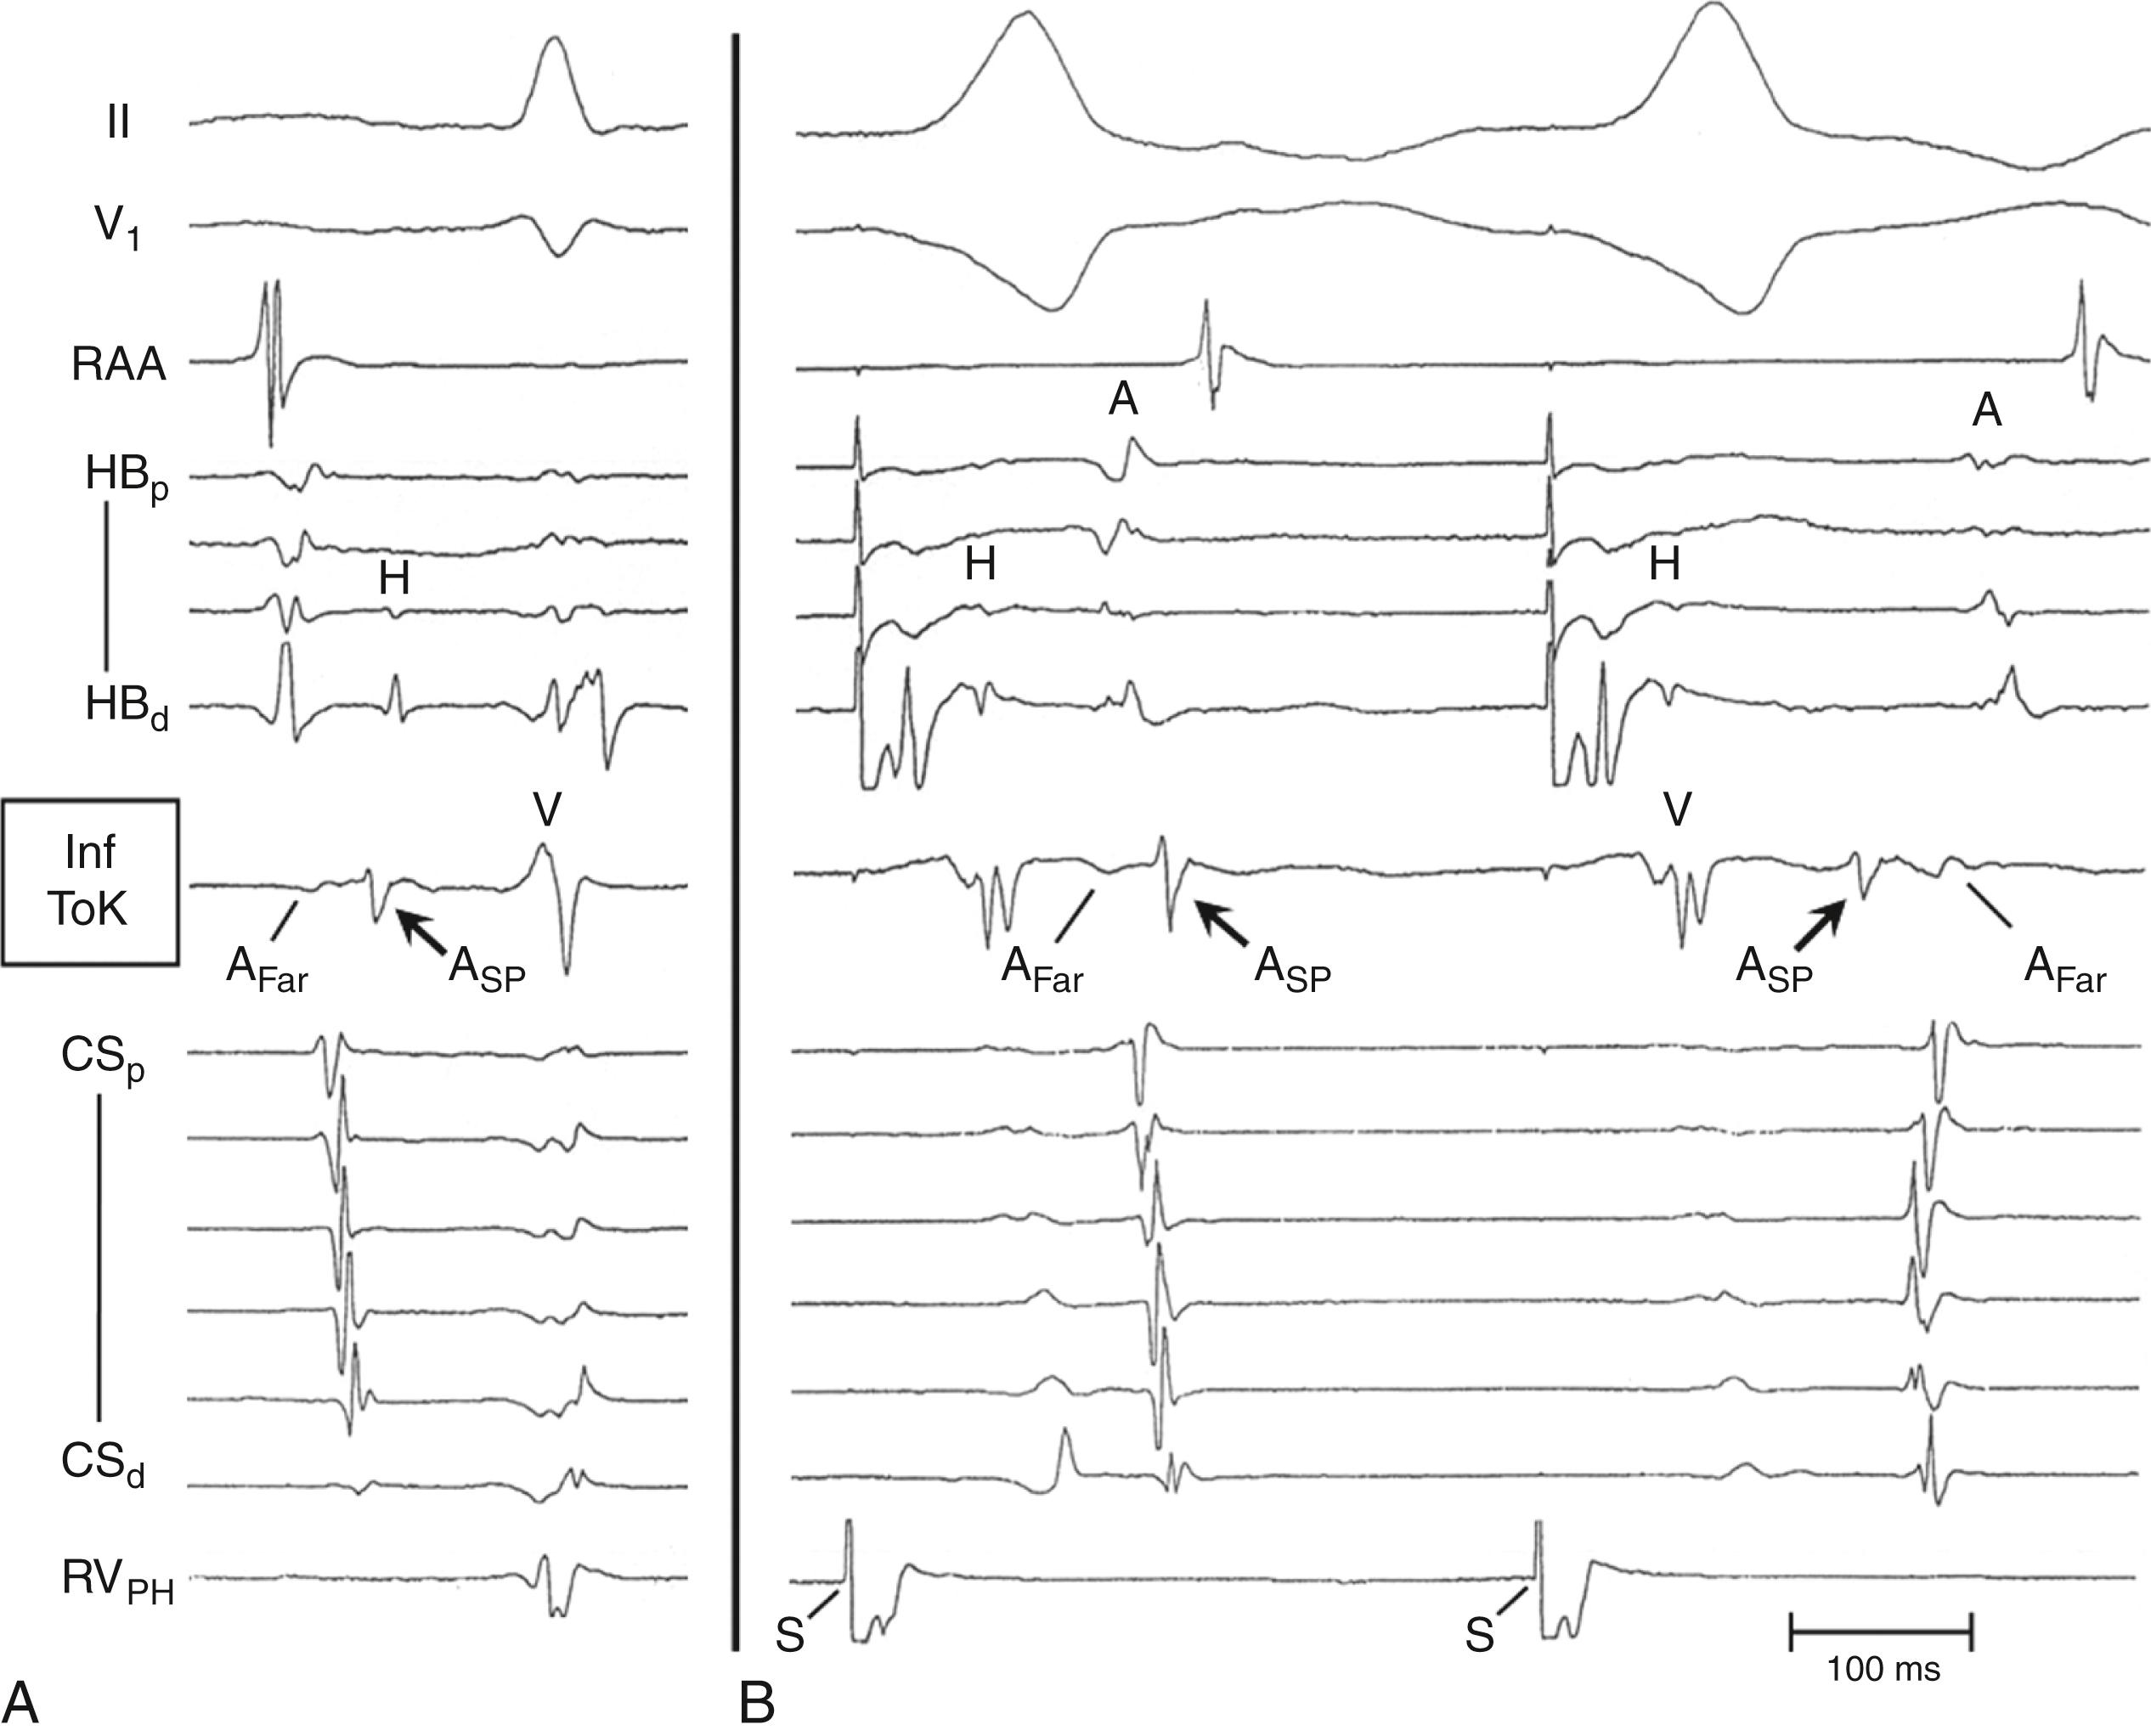 Fig. 72.2, Different atrial activation sequence during retrograde conduction over the fast pathway (FP) and a slow pathway (SP) formed by the rightward inferior extension (RIE) of the atrioventricular (AV) node.